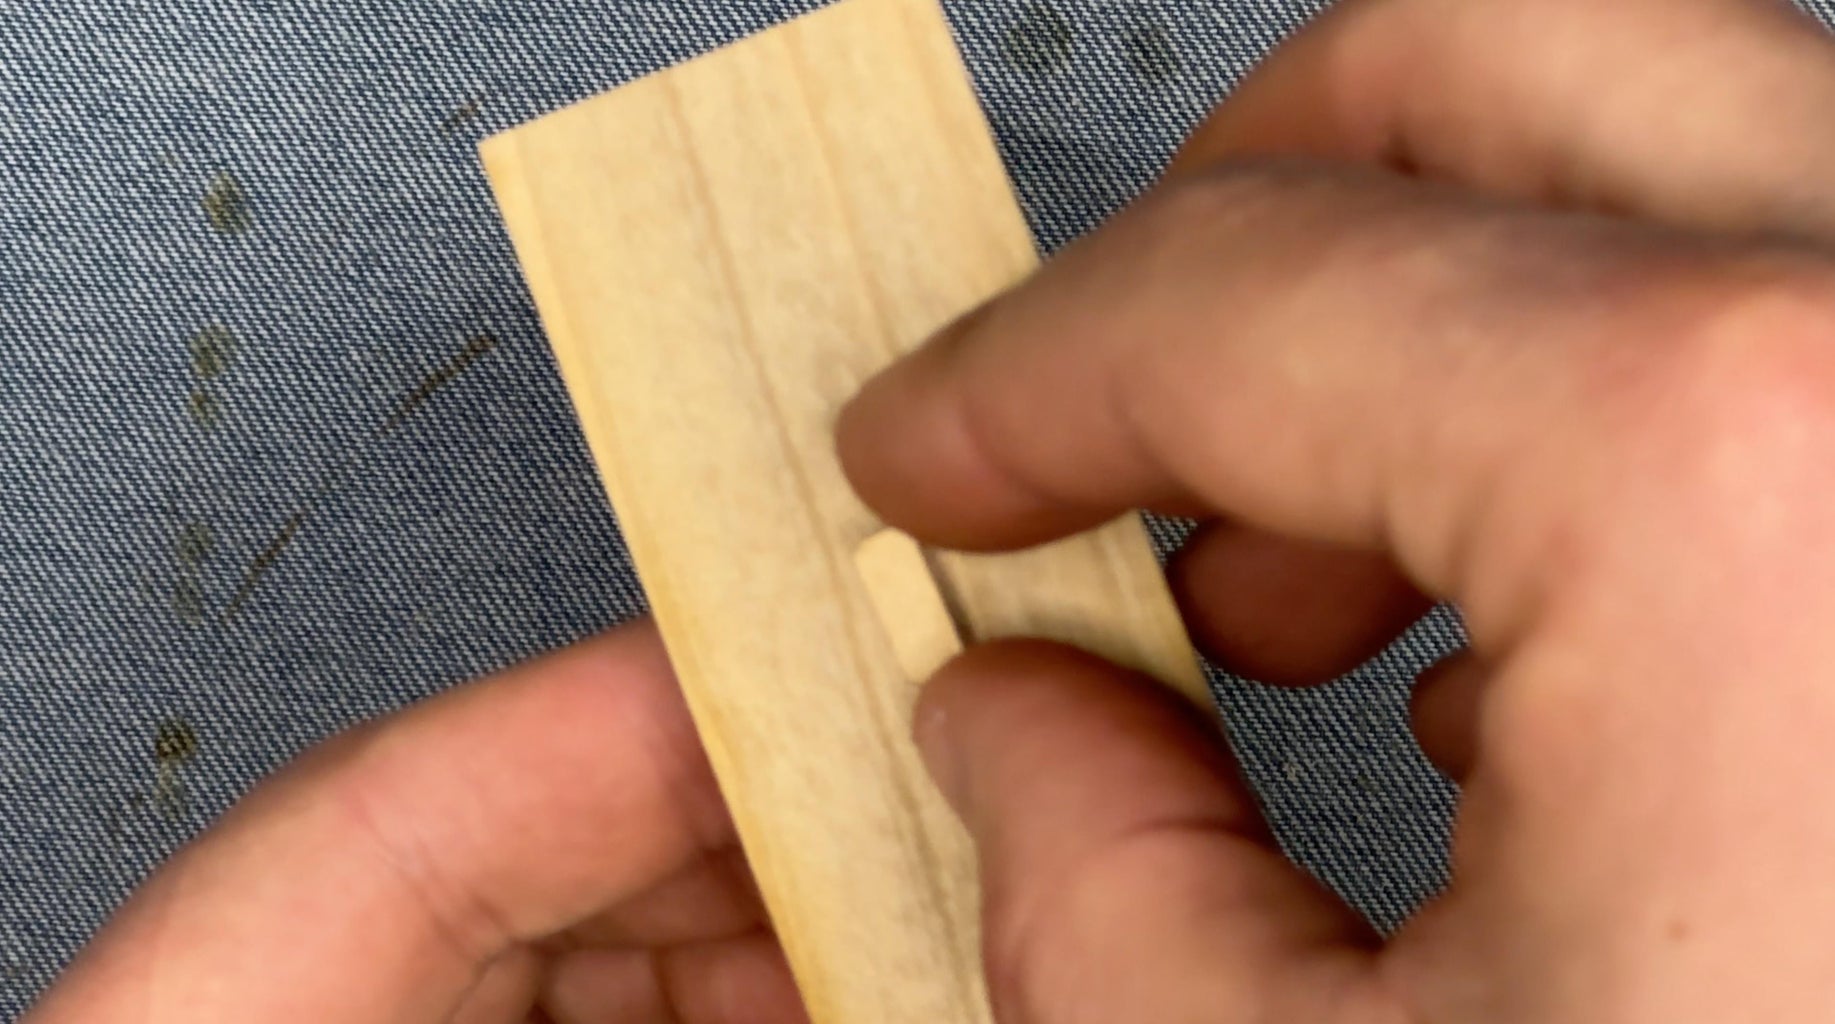 Attach a Small Piece of Wood As a Handle